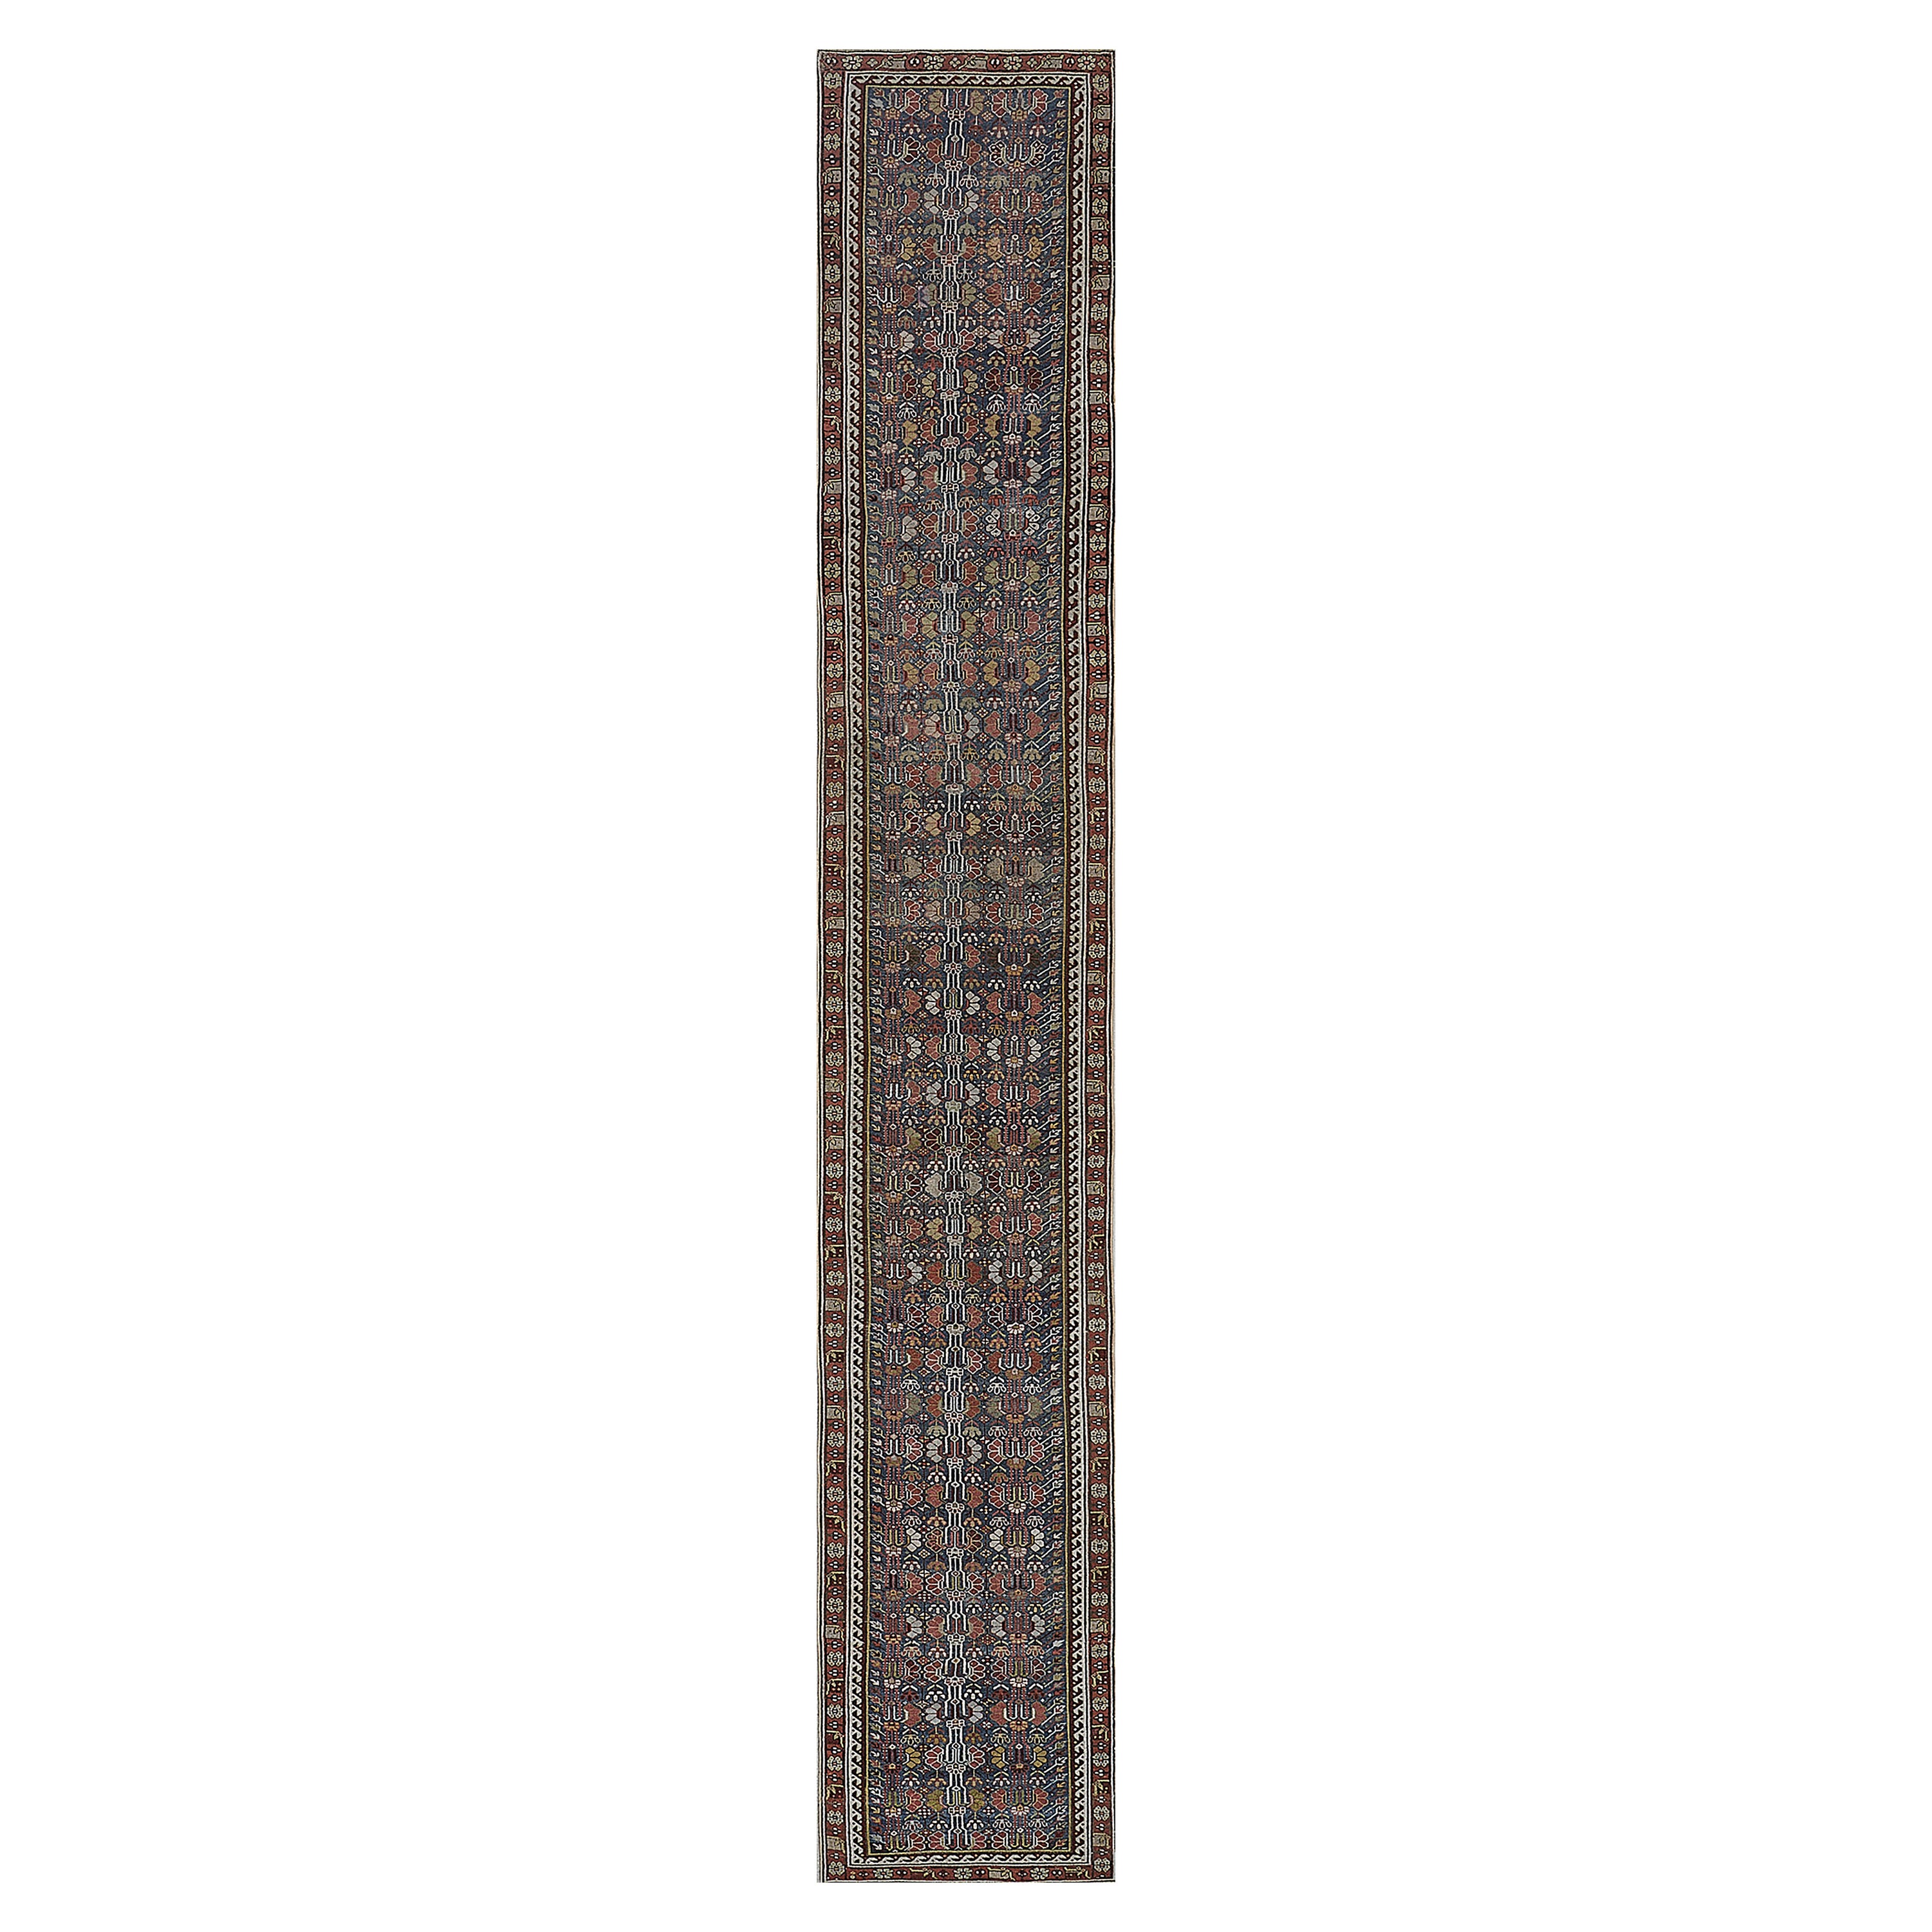 Early 20th Century Antique Hand-knotted Wool Persian Runner